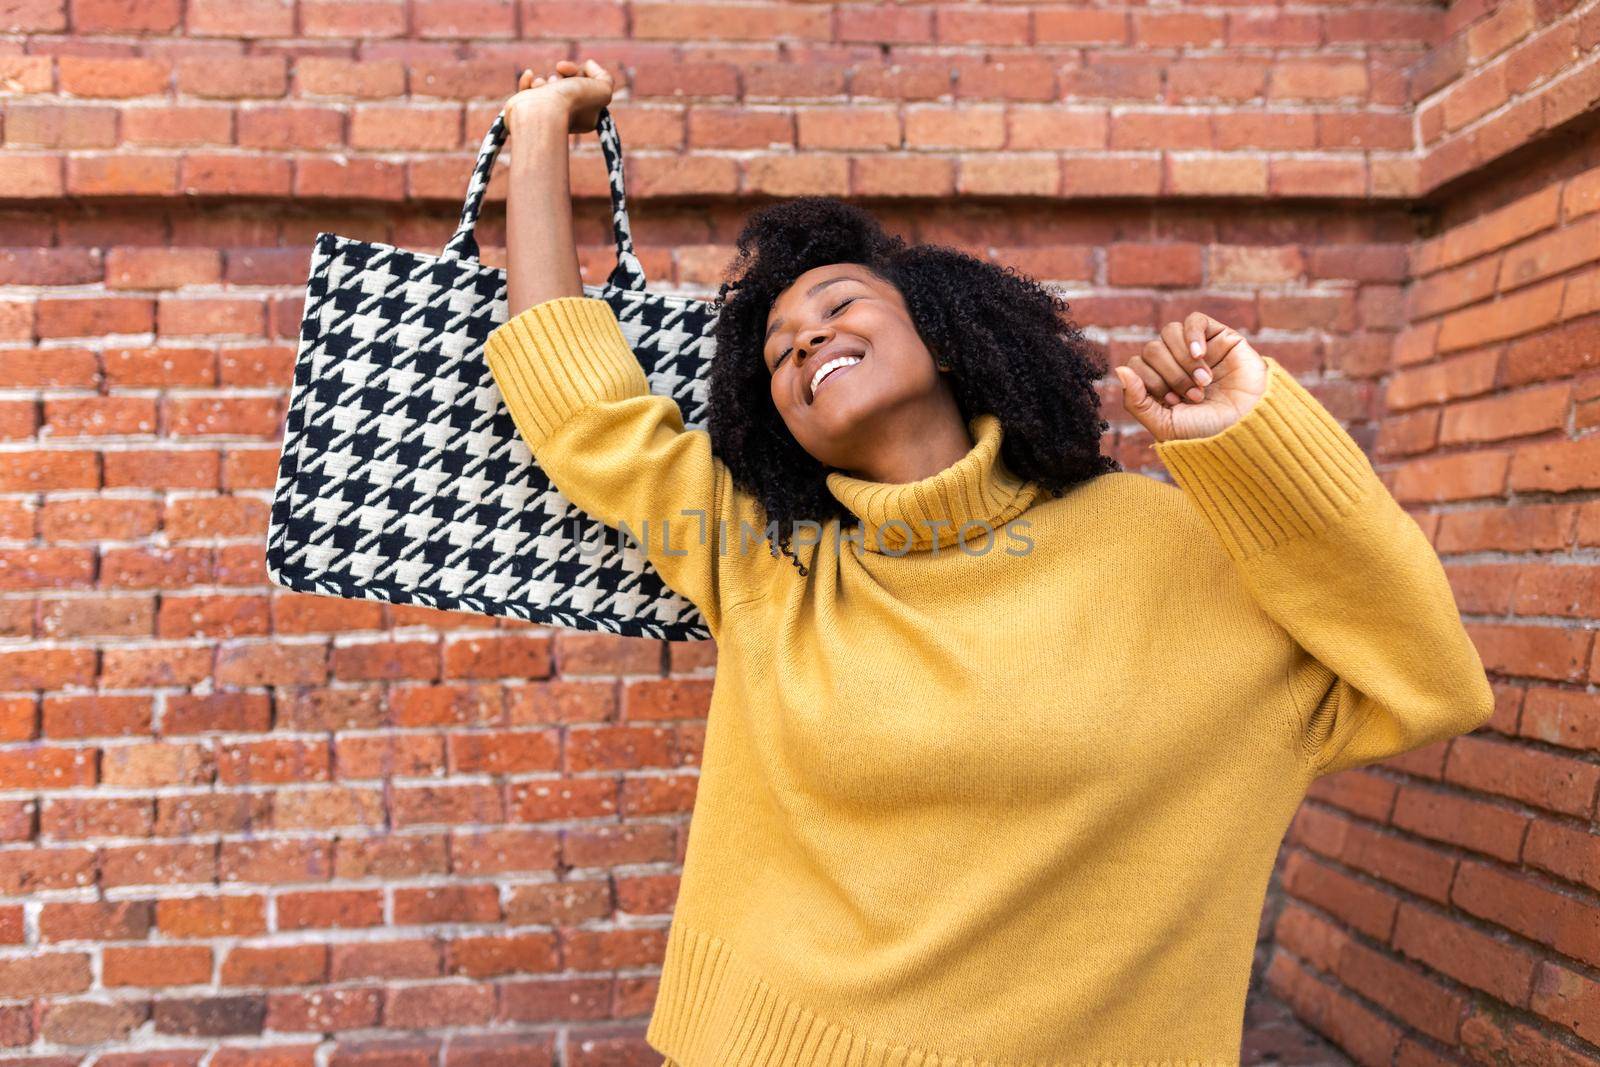 Joyful young african american woman dancing holding her handbag. Happiness and lifestyle concept.